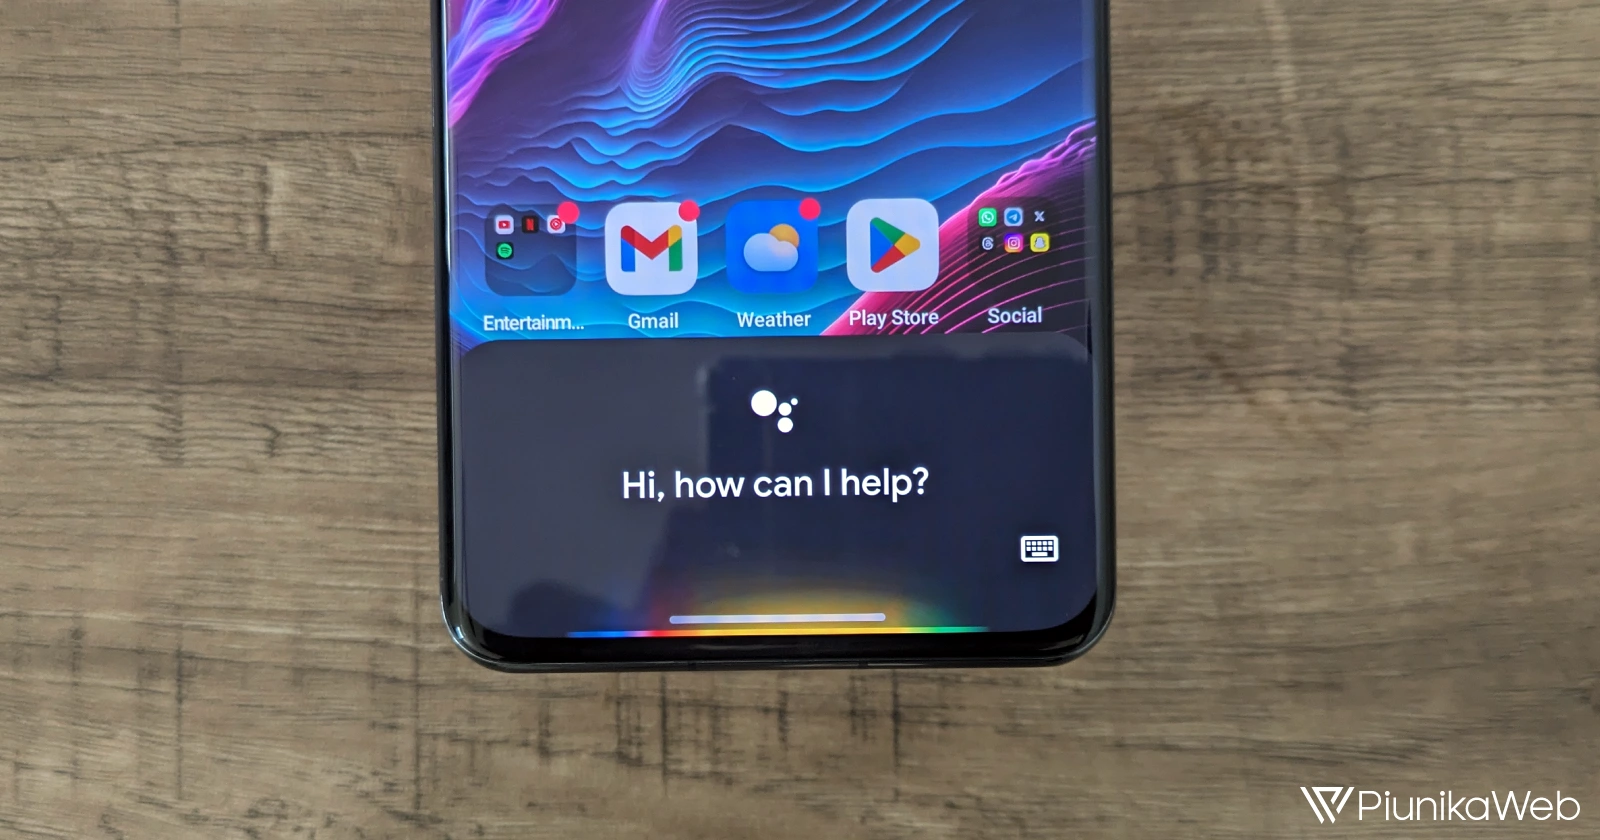 Poll: Should Google bring back option to long press on home button to launch Assistant when Circle to Search is disabled?